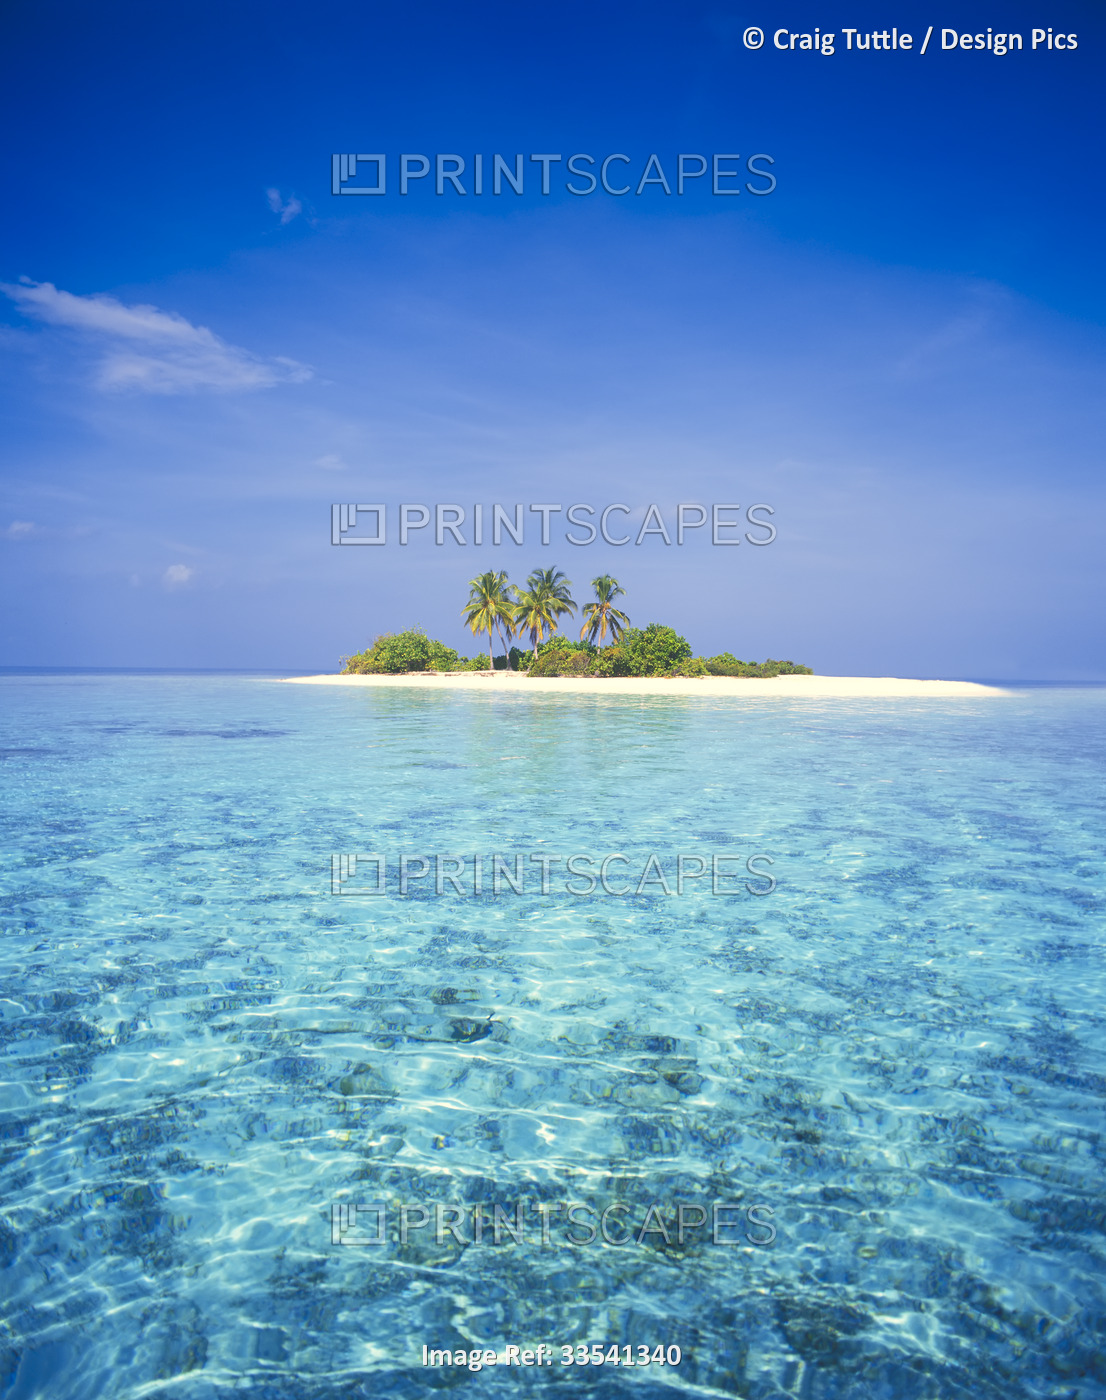 Small island in the Maldives with palm trees and white sand; Maldives